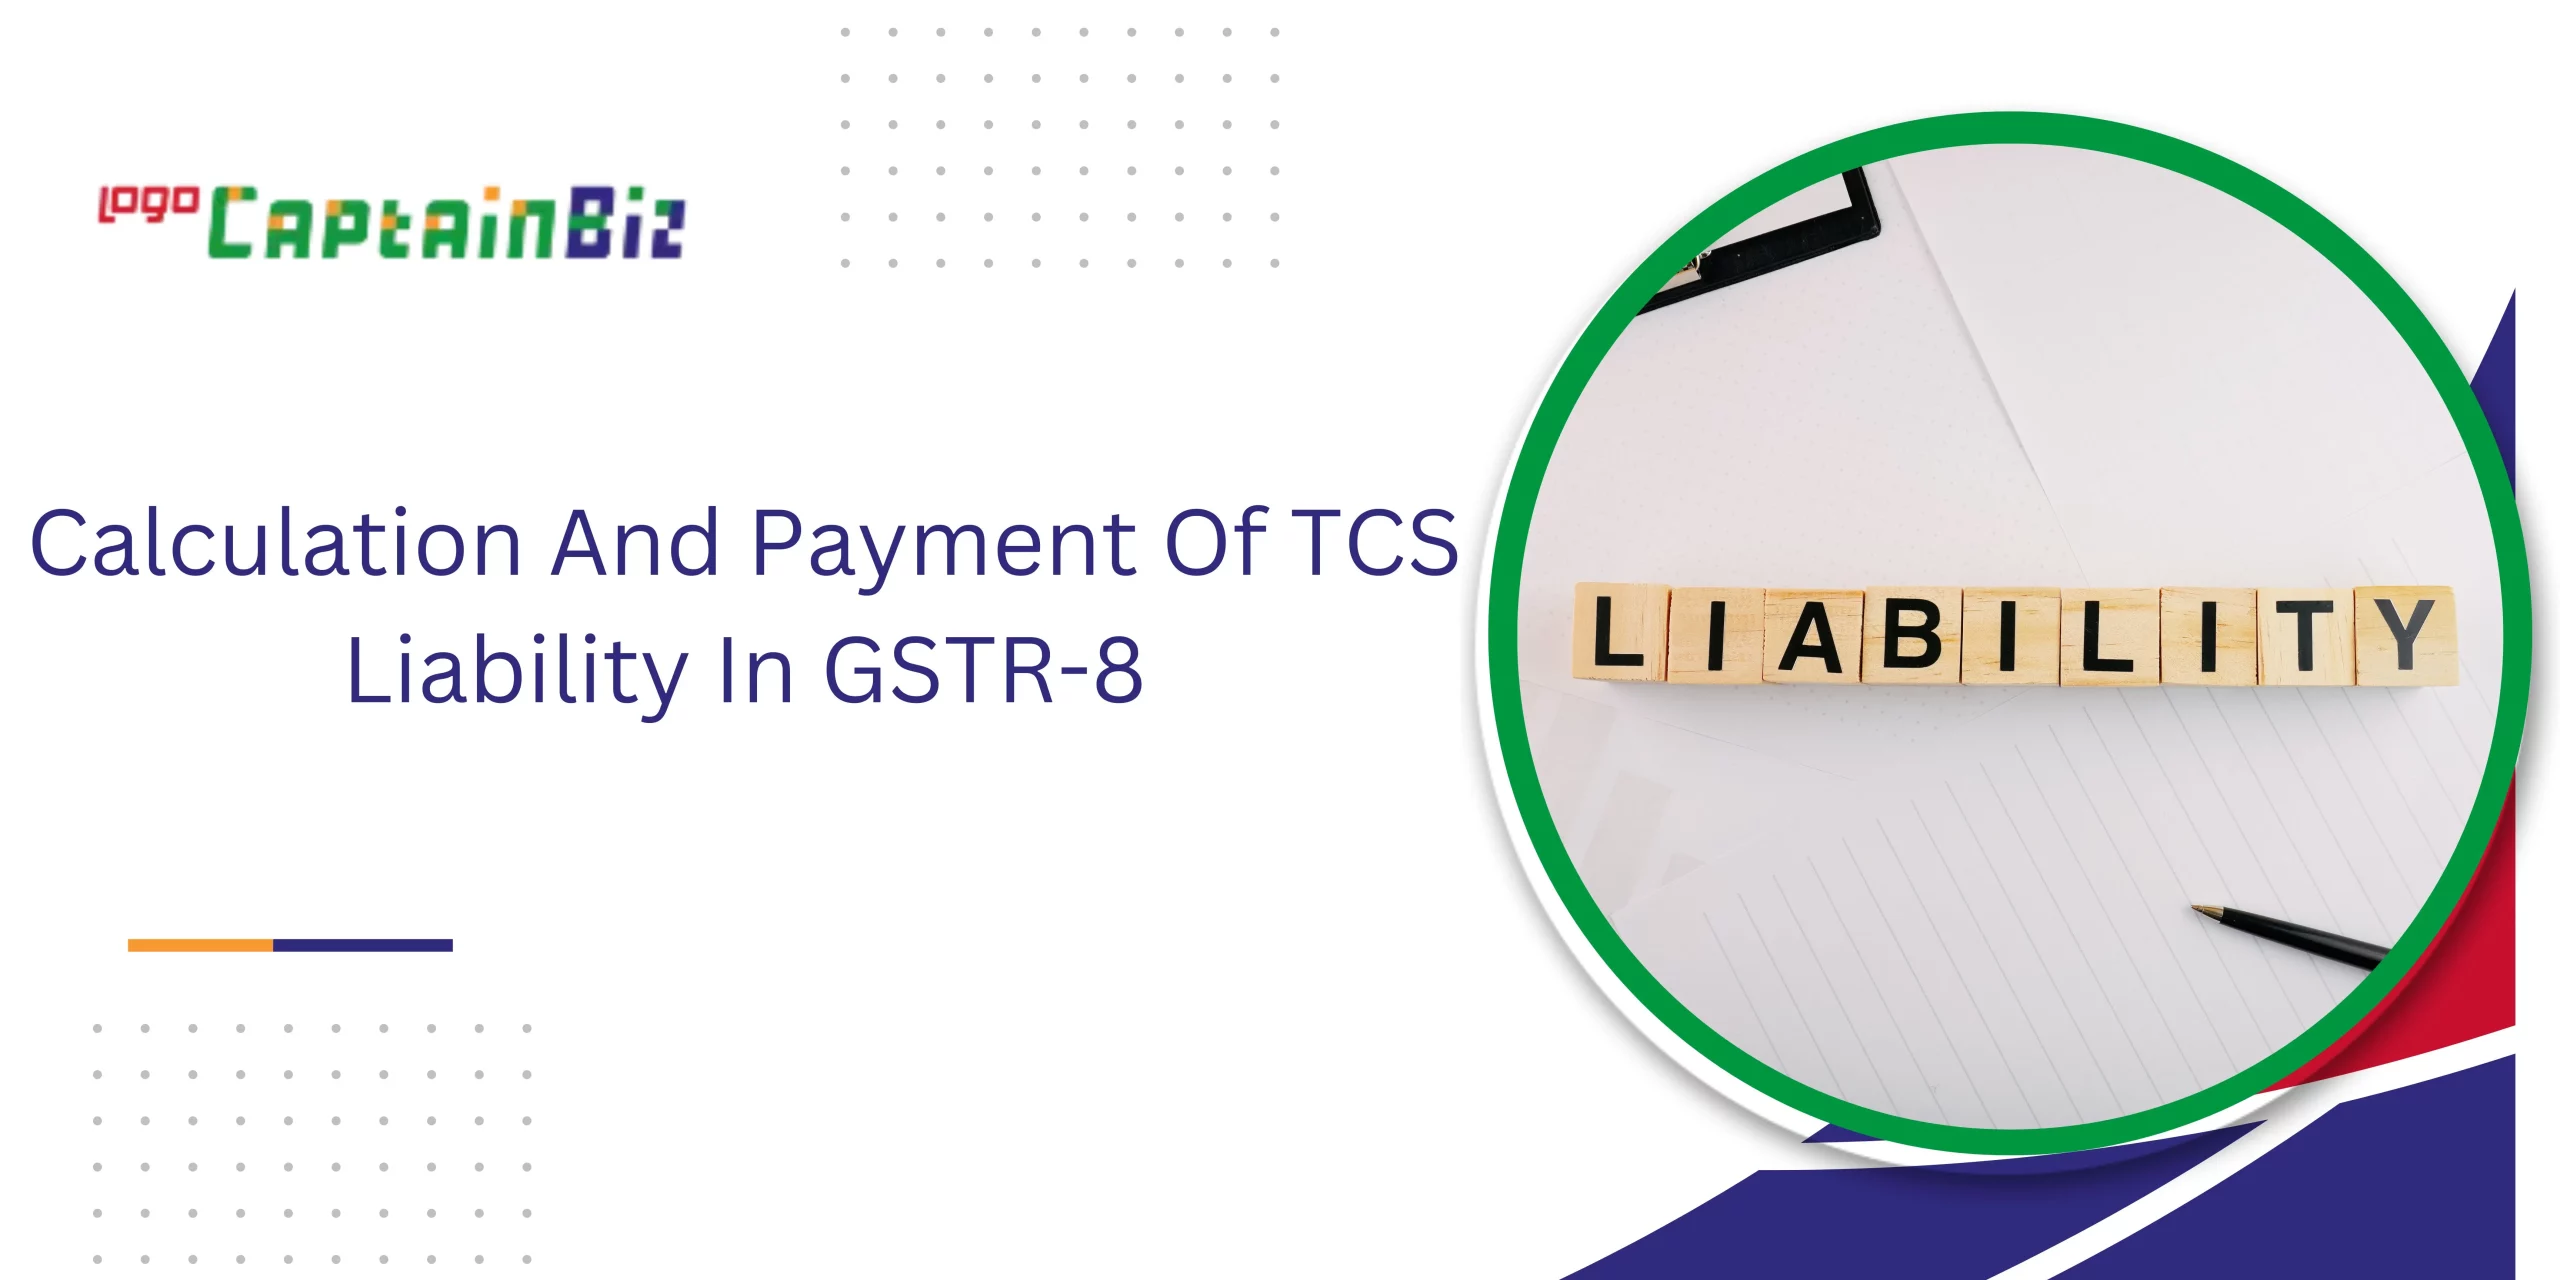 CaptainBiz: Calculation And Payment Of TCS Liability In GSTR-8